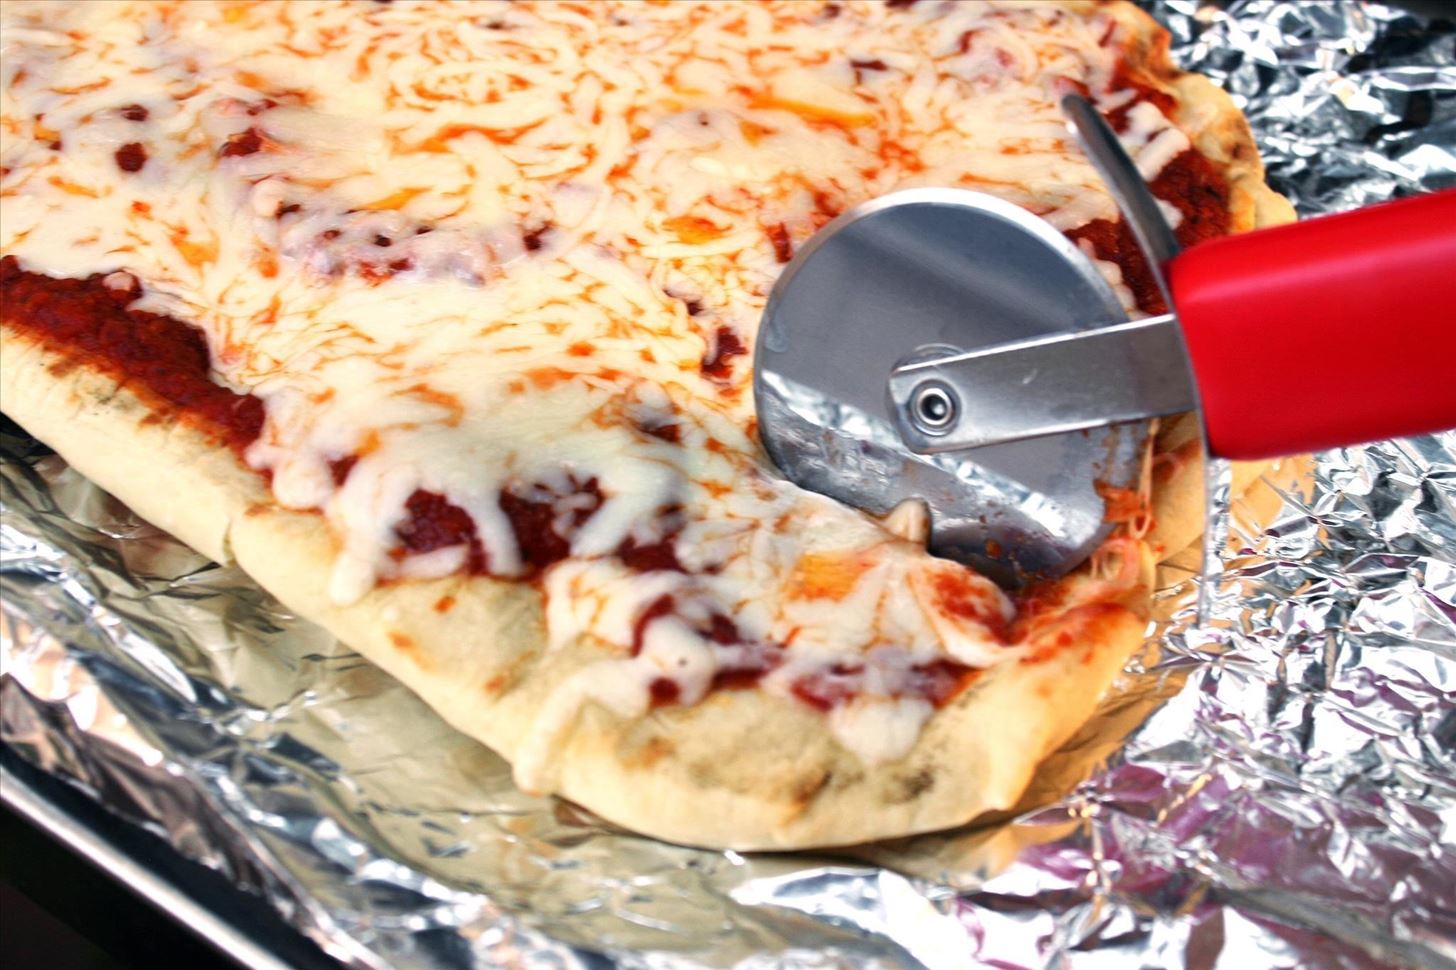 How to Grill Pizza Like a Pro